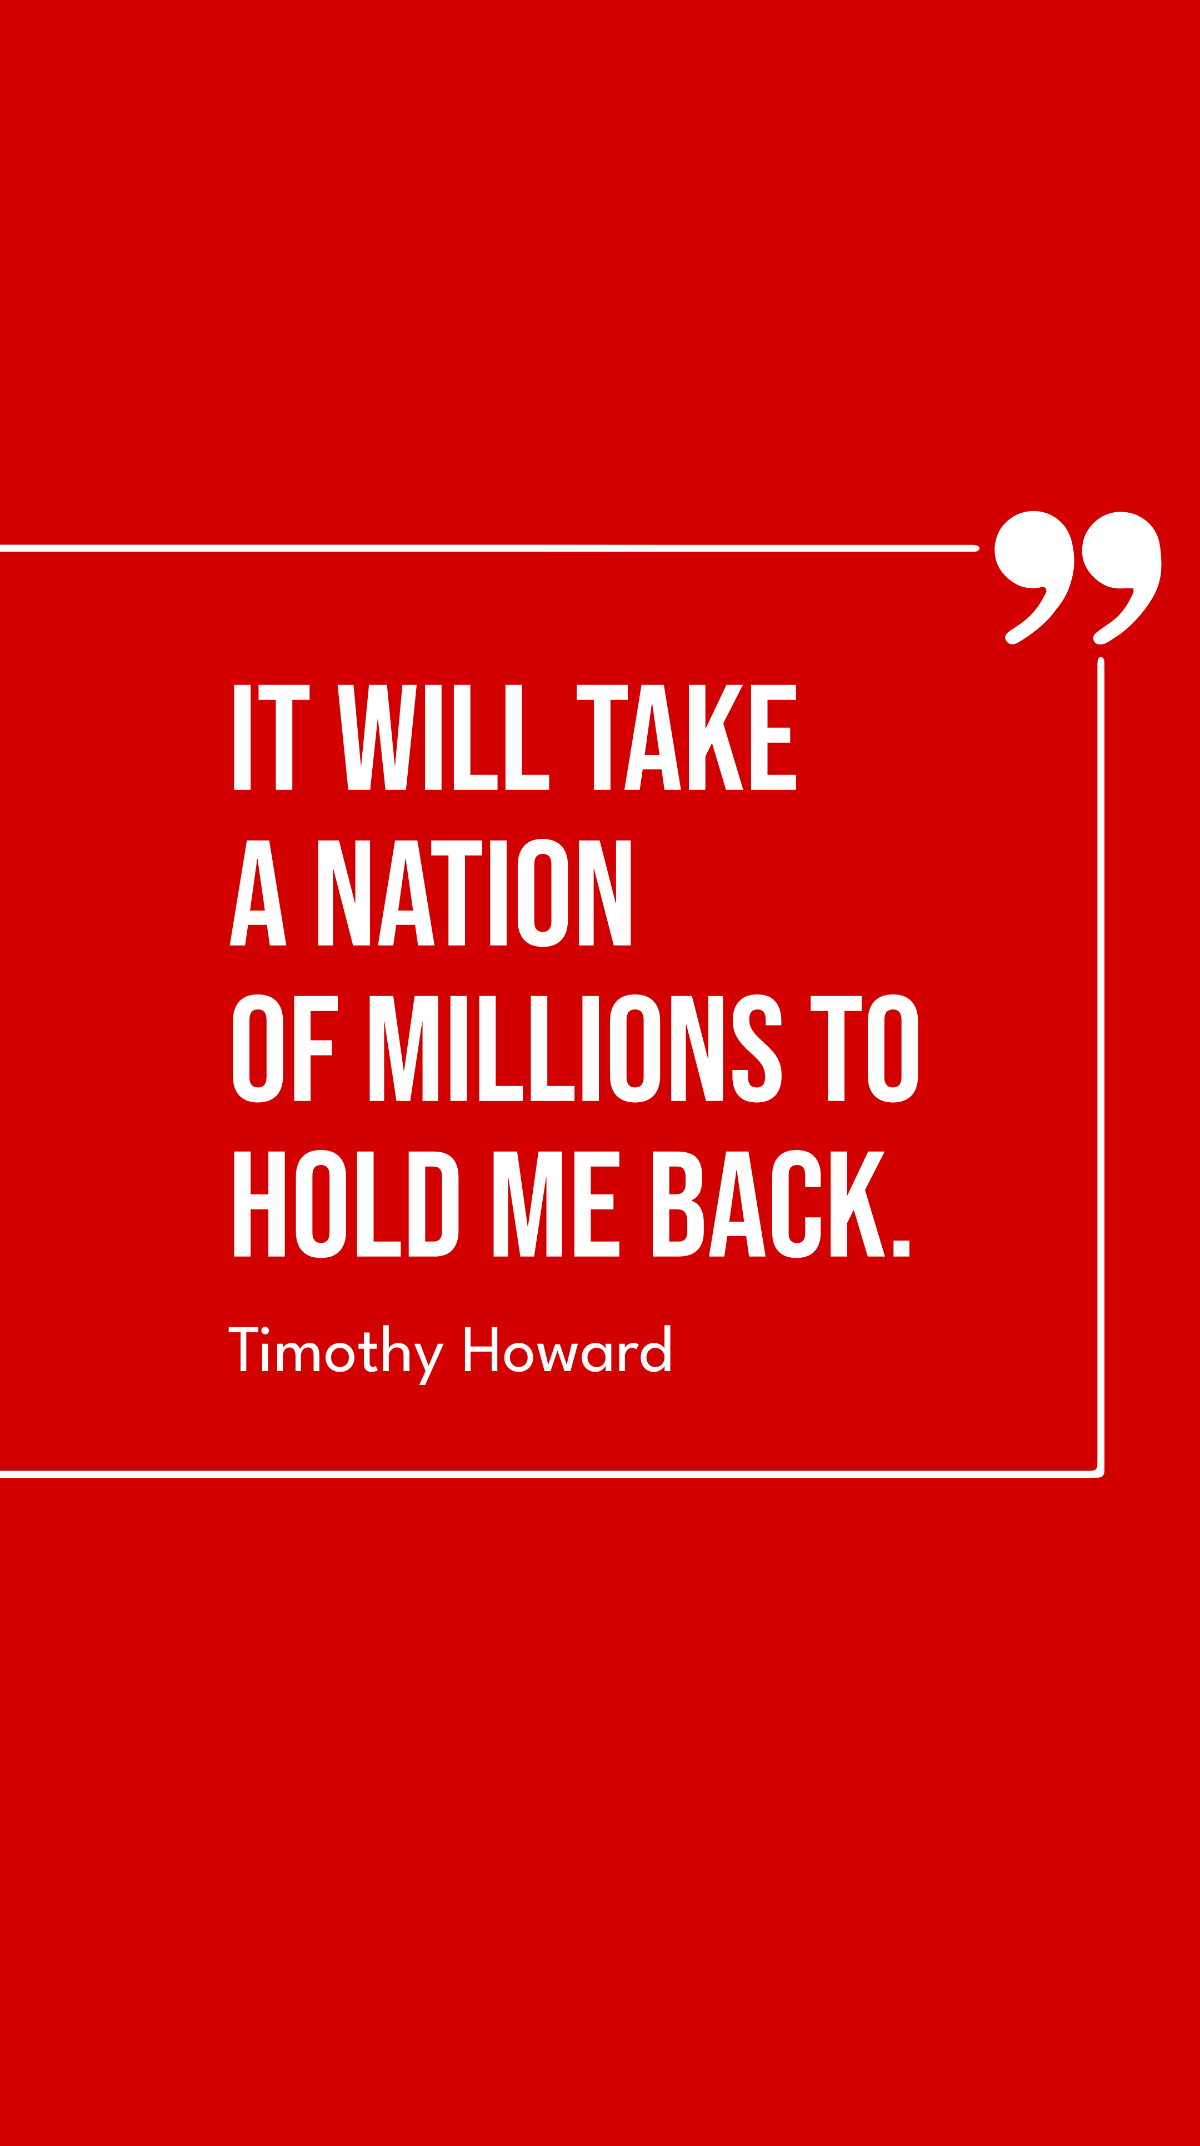 Timothy Howard - It will take a nation of millions to hold me back. Template